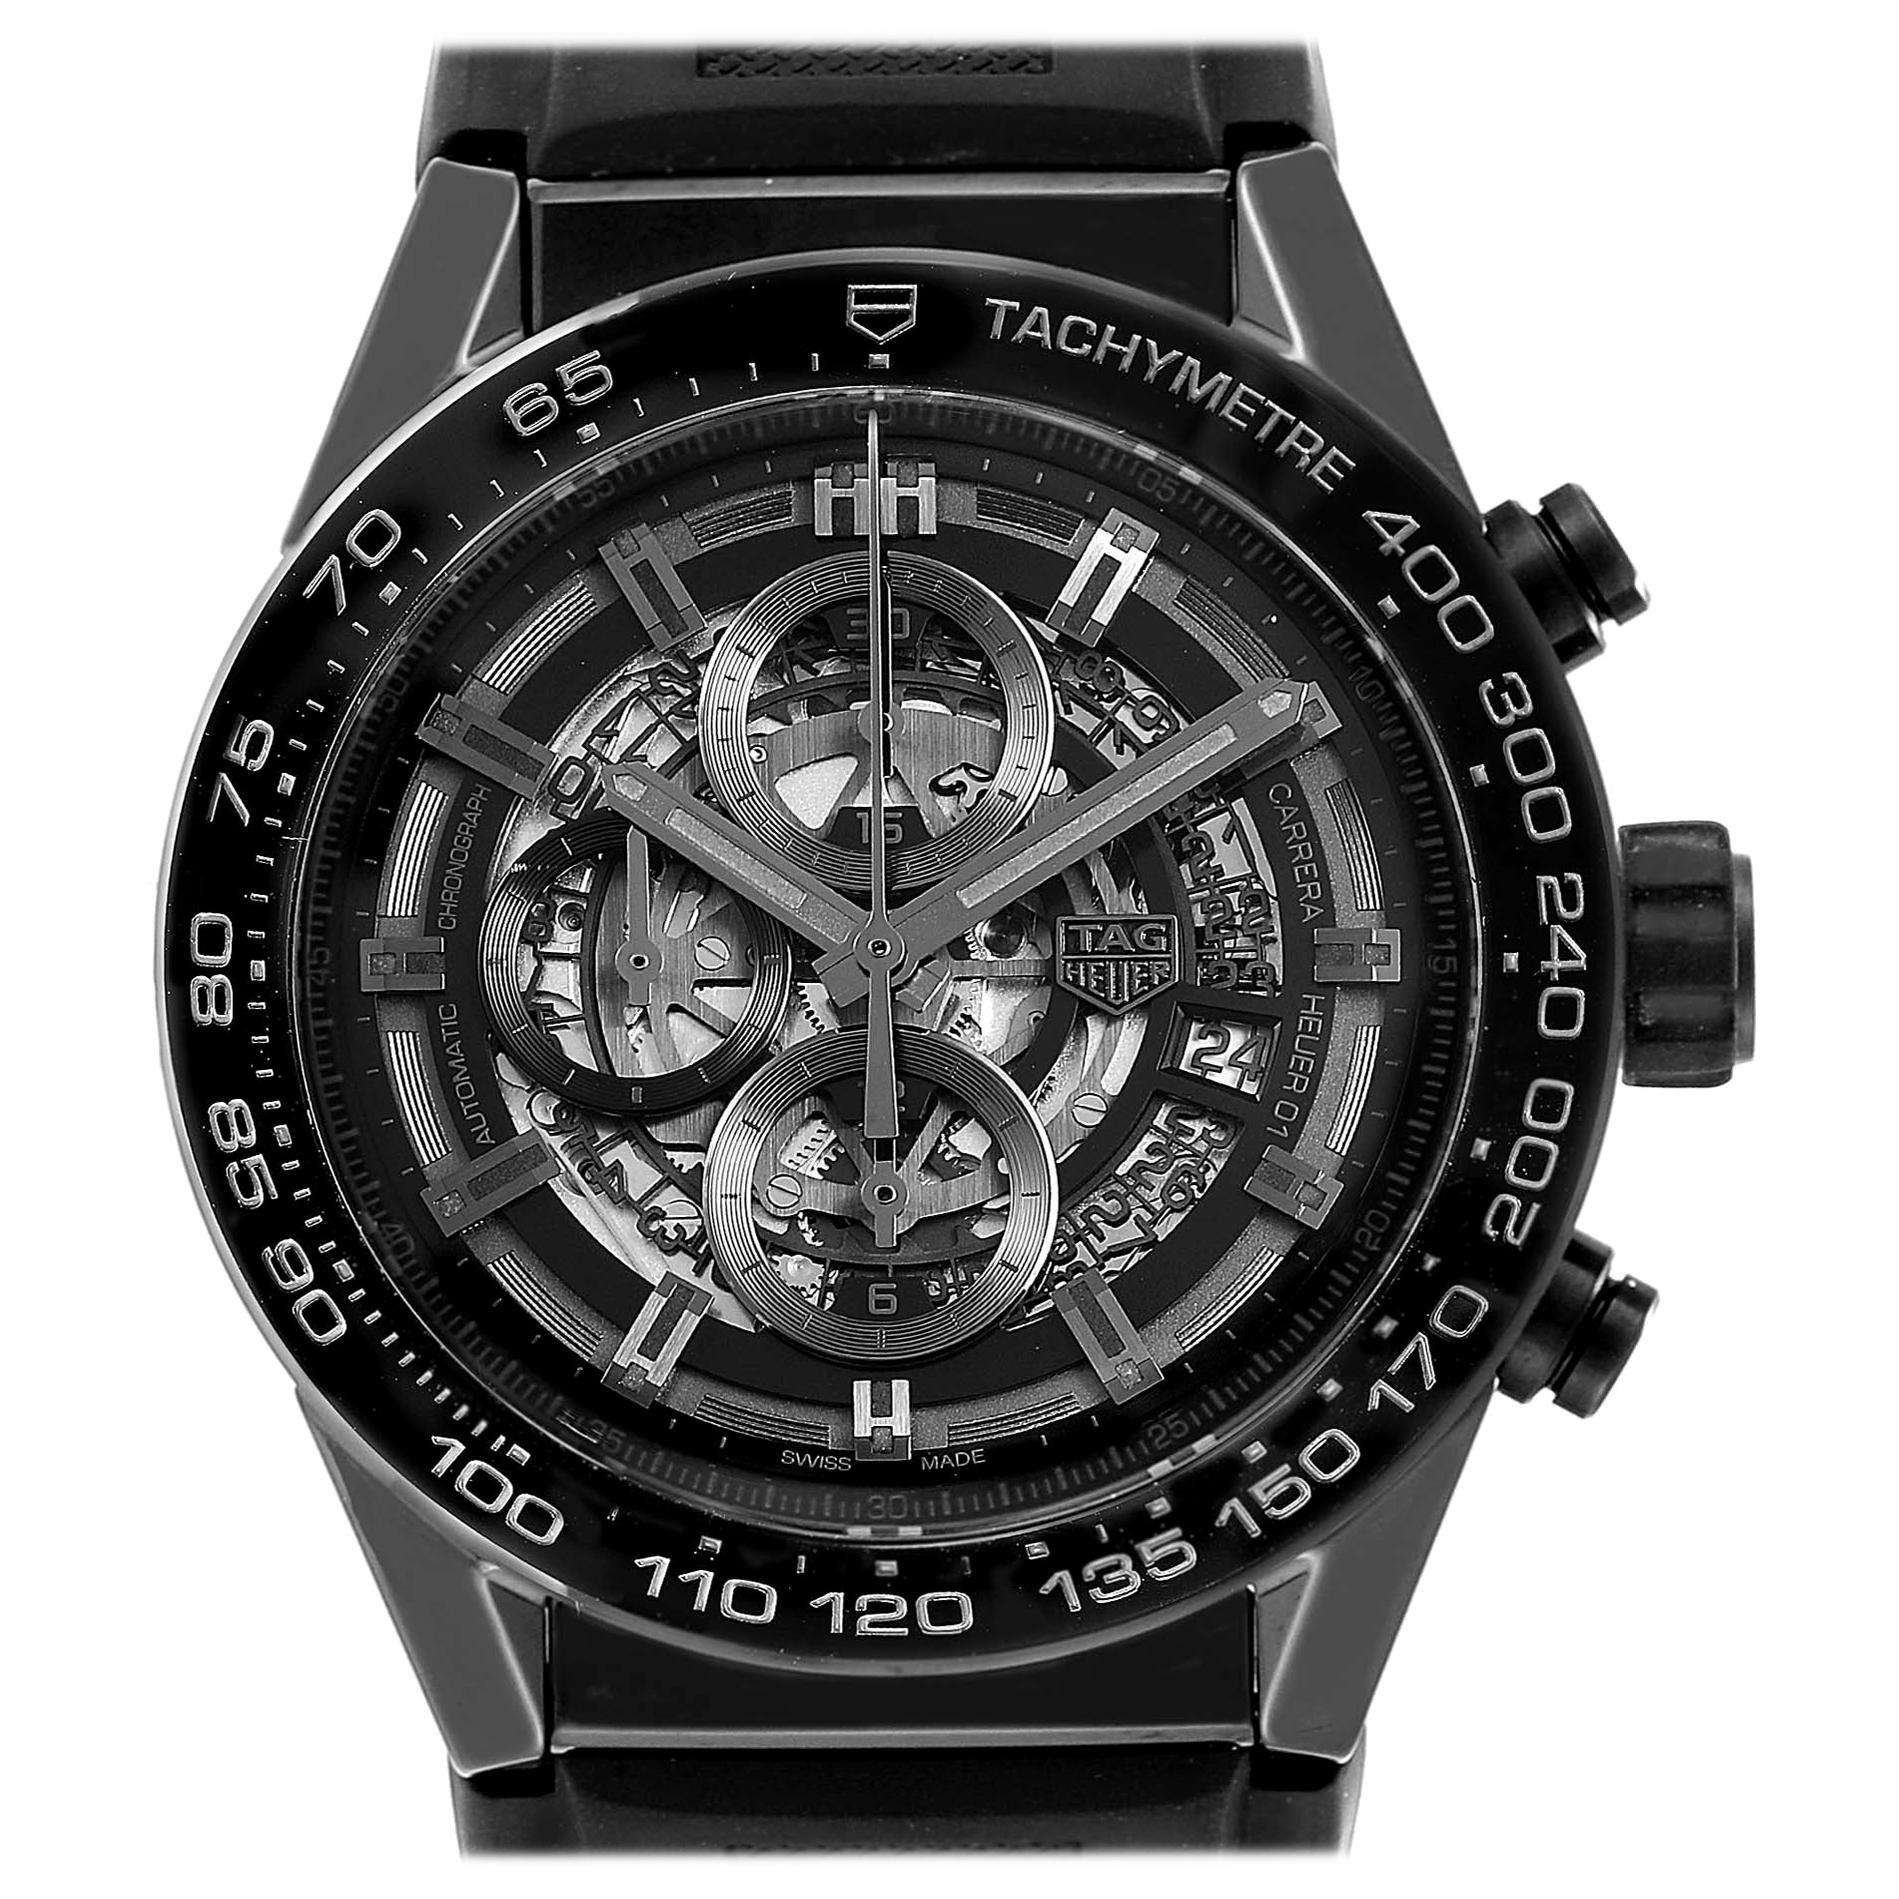 TAG Heuer Carrera Black Ceramic Chronograph Watch CAR2A90 Box Papers